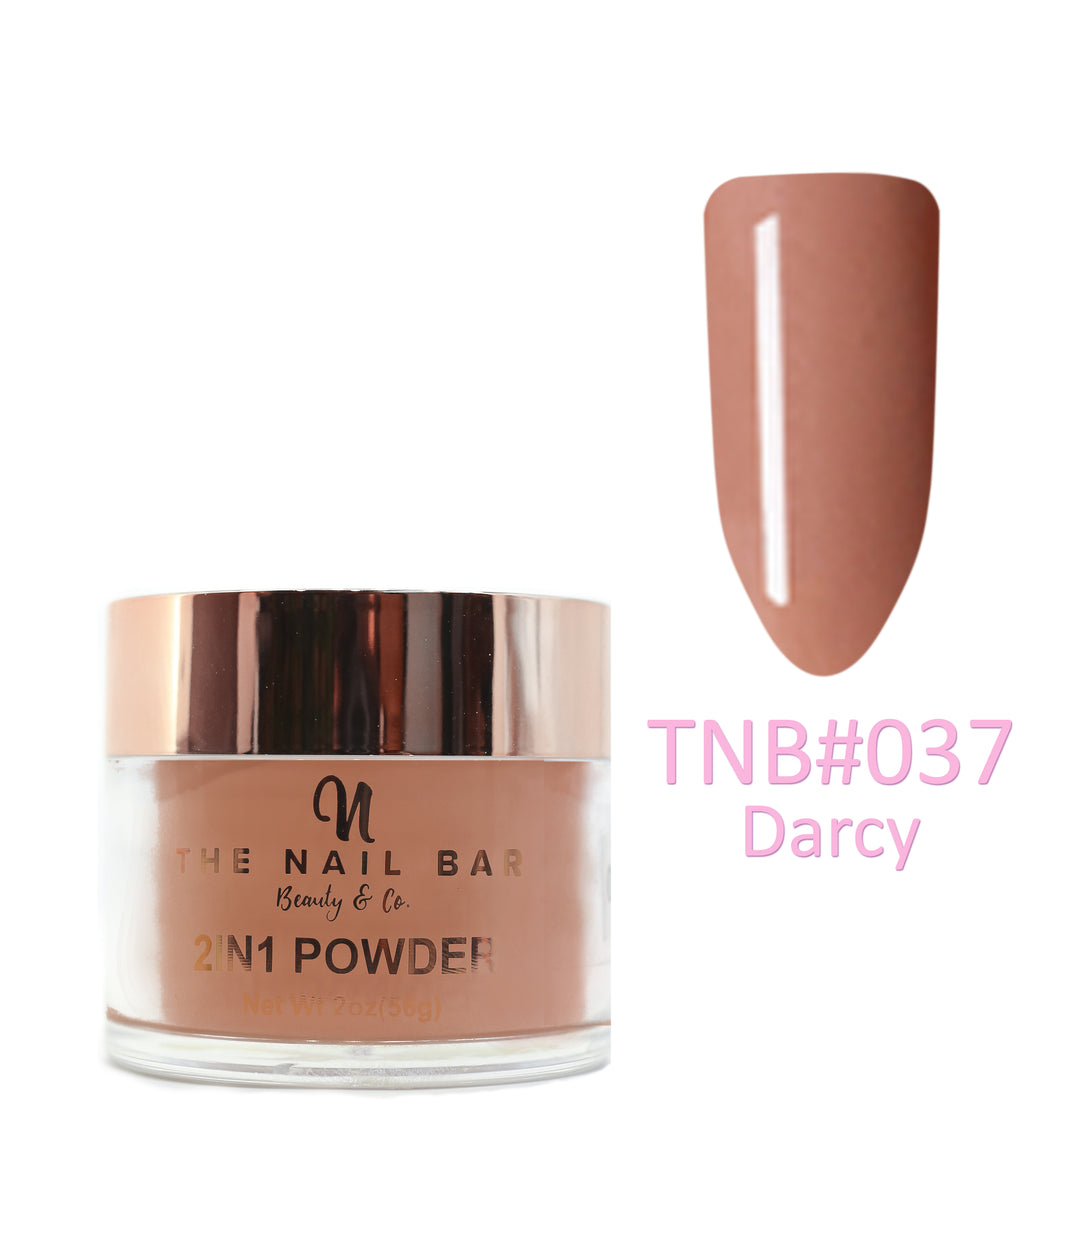 2-In-1 Dipping/Acrylic colour powder (2oz) -Darcy - The Nail Bar Beauty & Co.